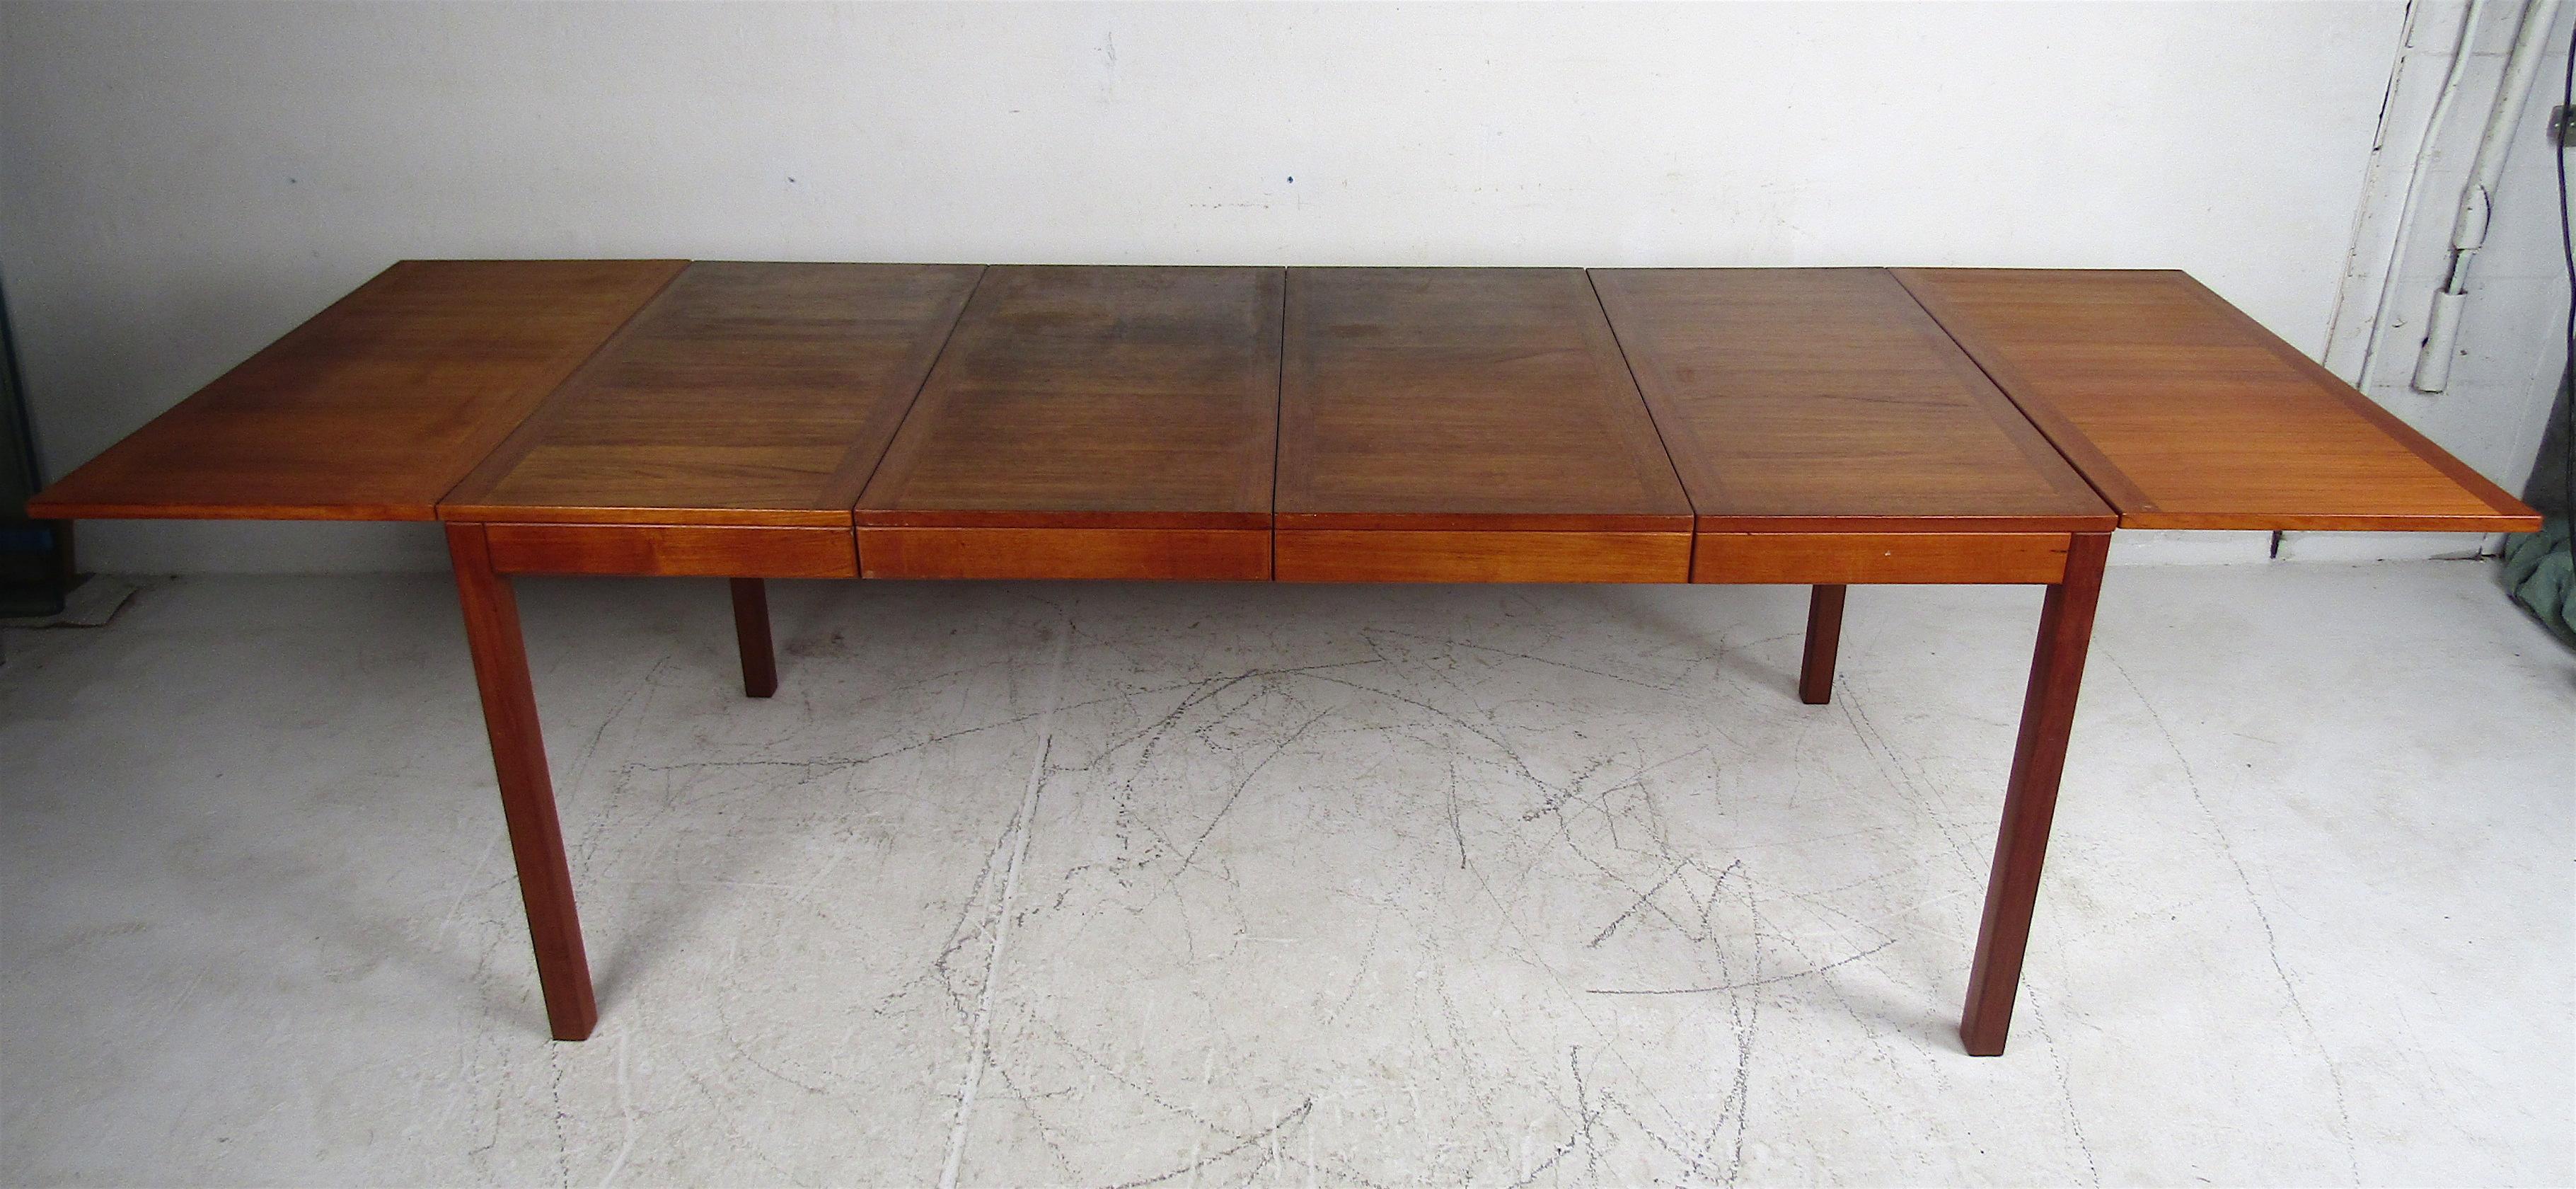 A beautiful Mid-Century Modern teak drop leaf dining table with two removable leaves ensuring convenience for additional guests. A rich vintage teak finish with the original manufacturers label underneath. A sleek design that is sure to make a